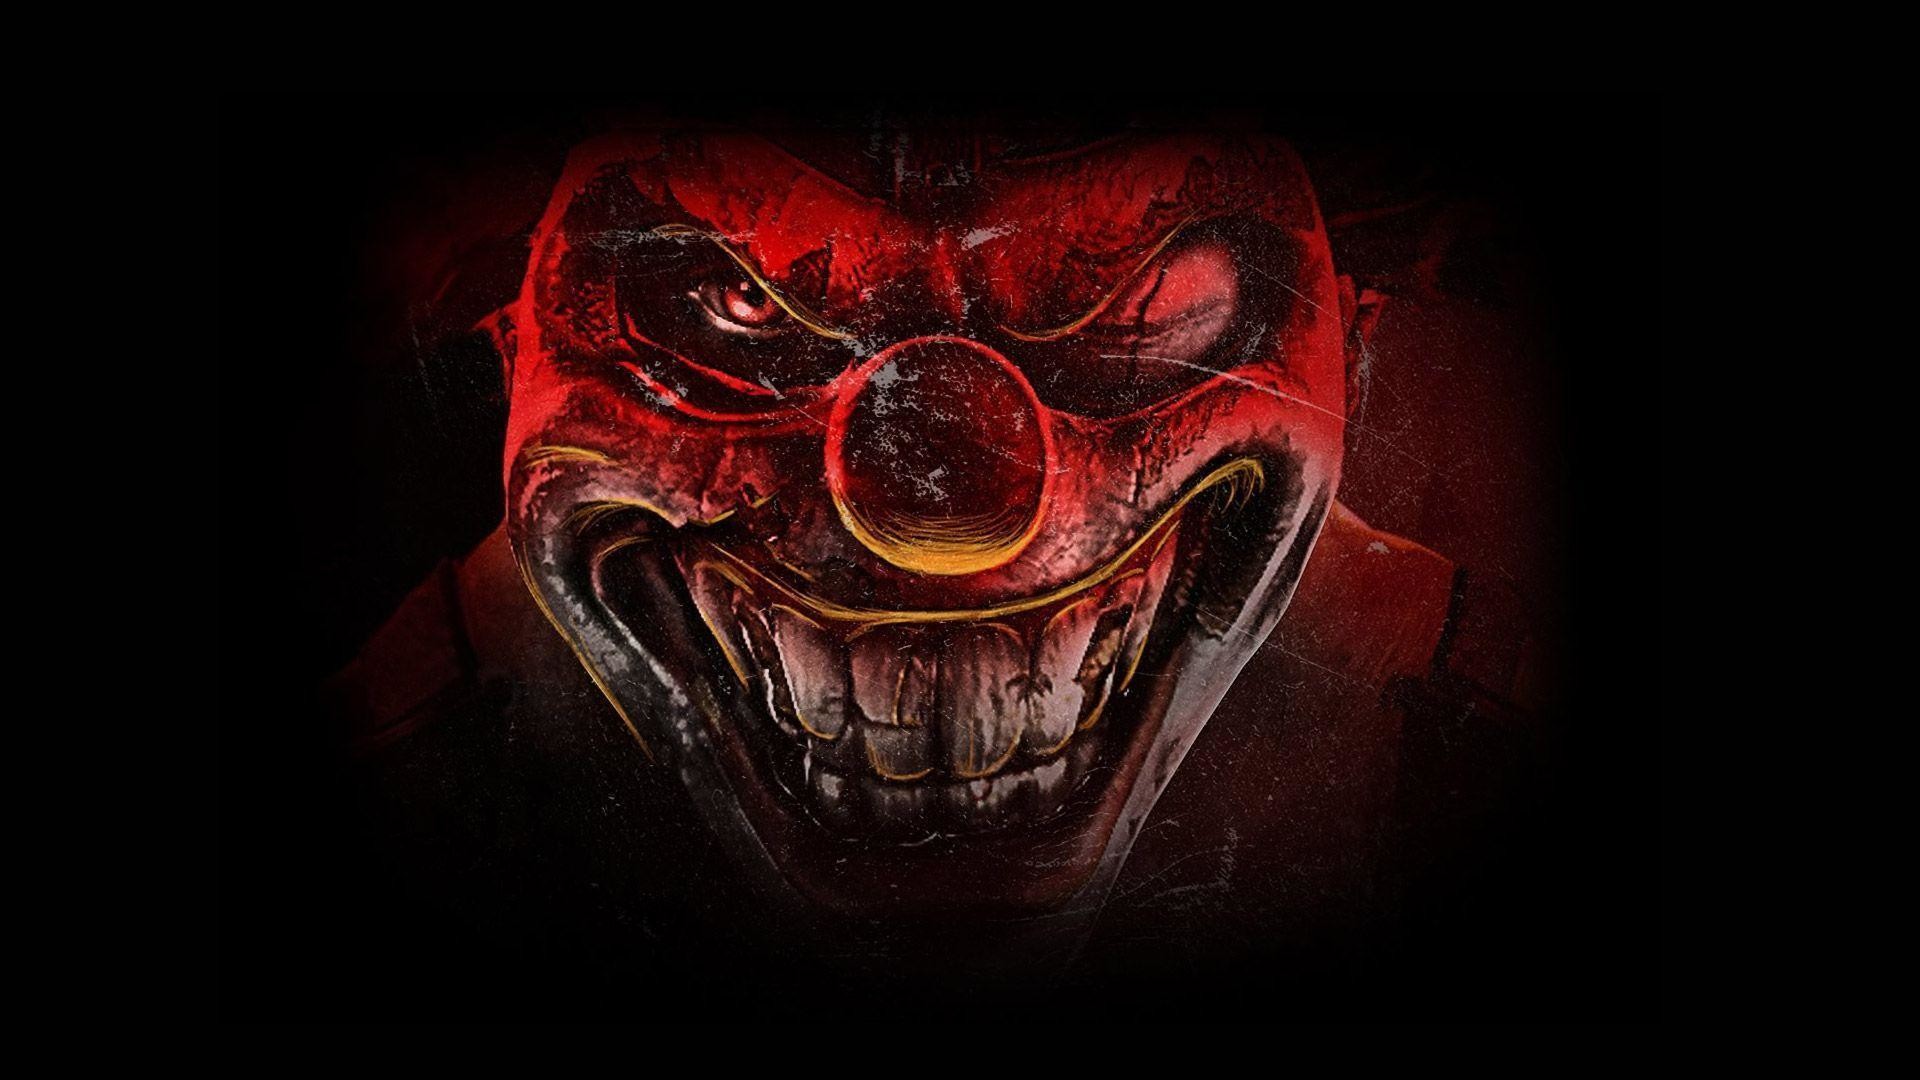 1920x1080 15 Twisted Metal Wallpapers | Twisted Metal Backgrounds